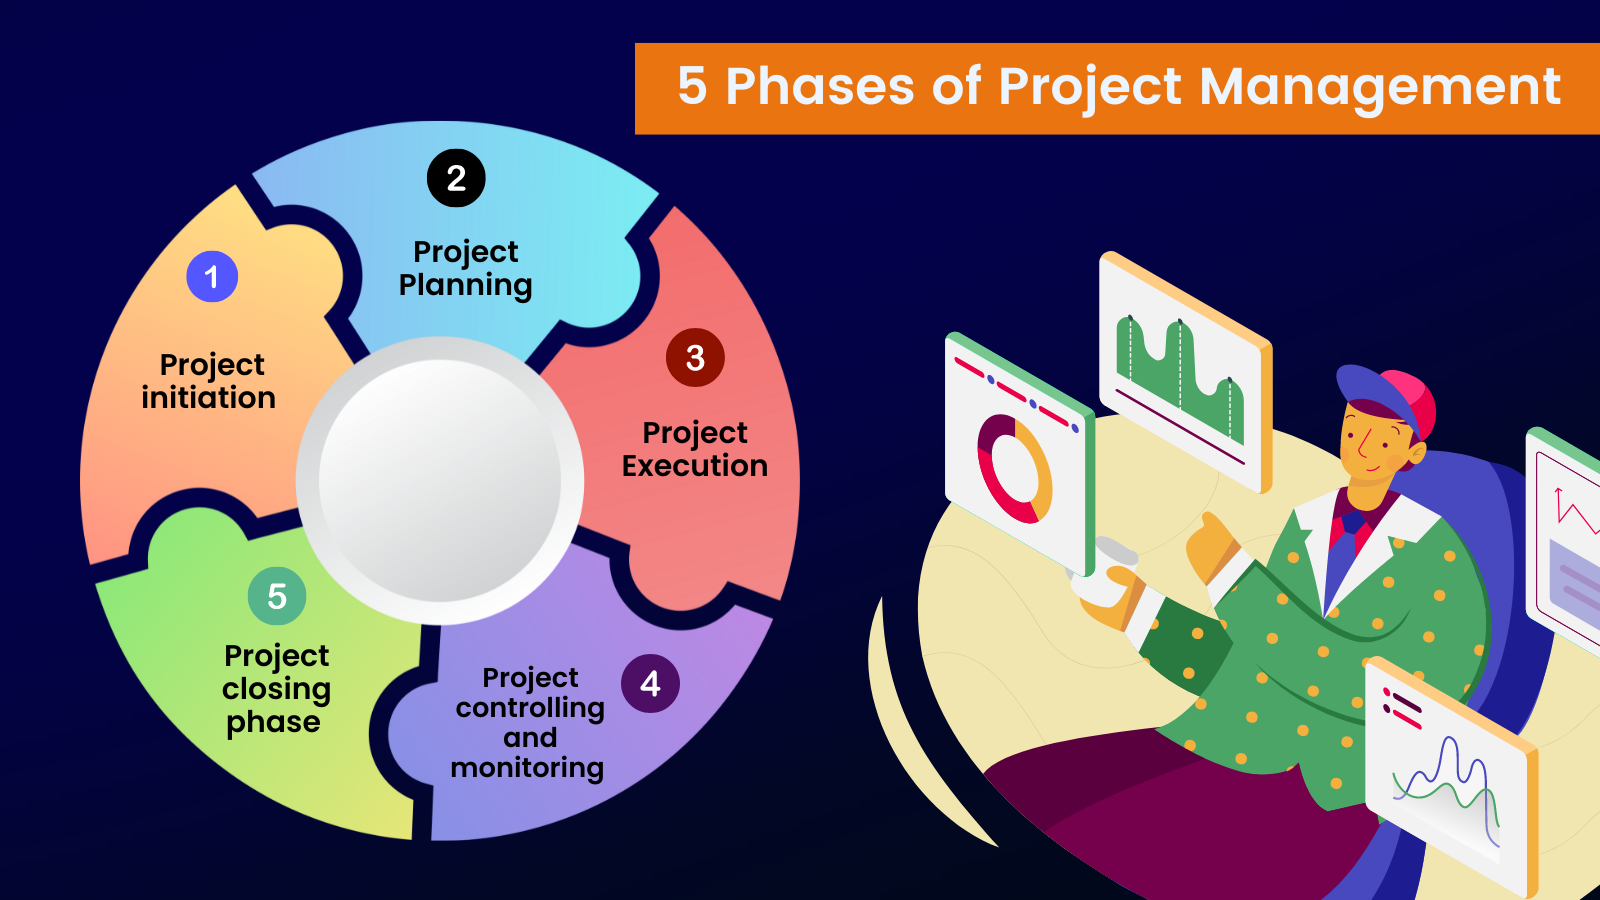 5 phases of project management